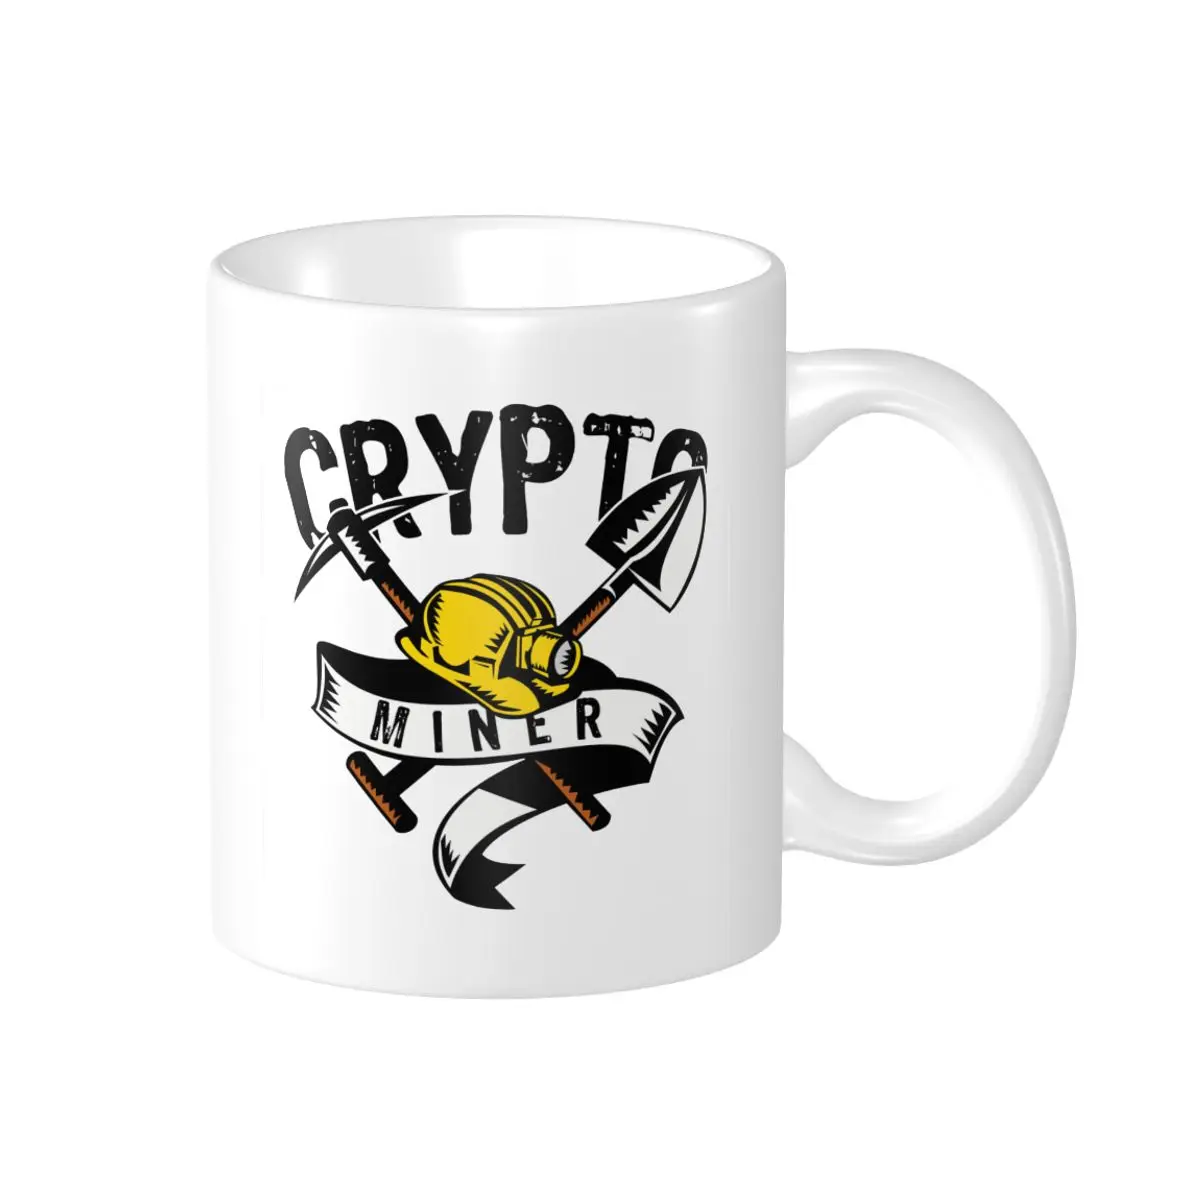 Promo Crypto Miner Tools Mugs Graphic Cool Cups CUPS Print Nerdy Crypto beer mugs